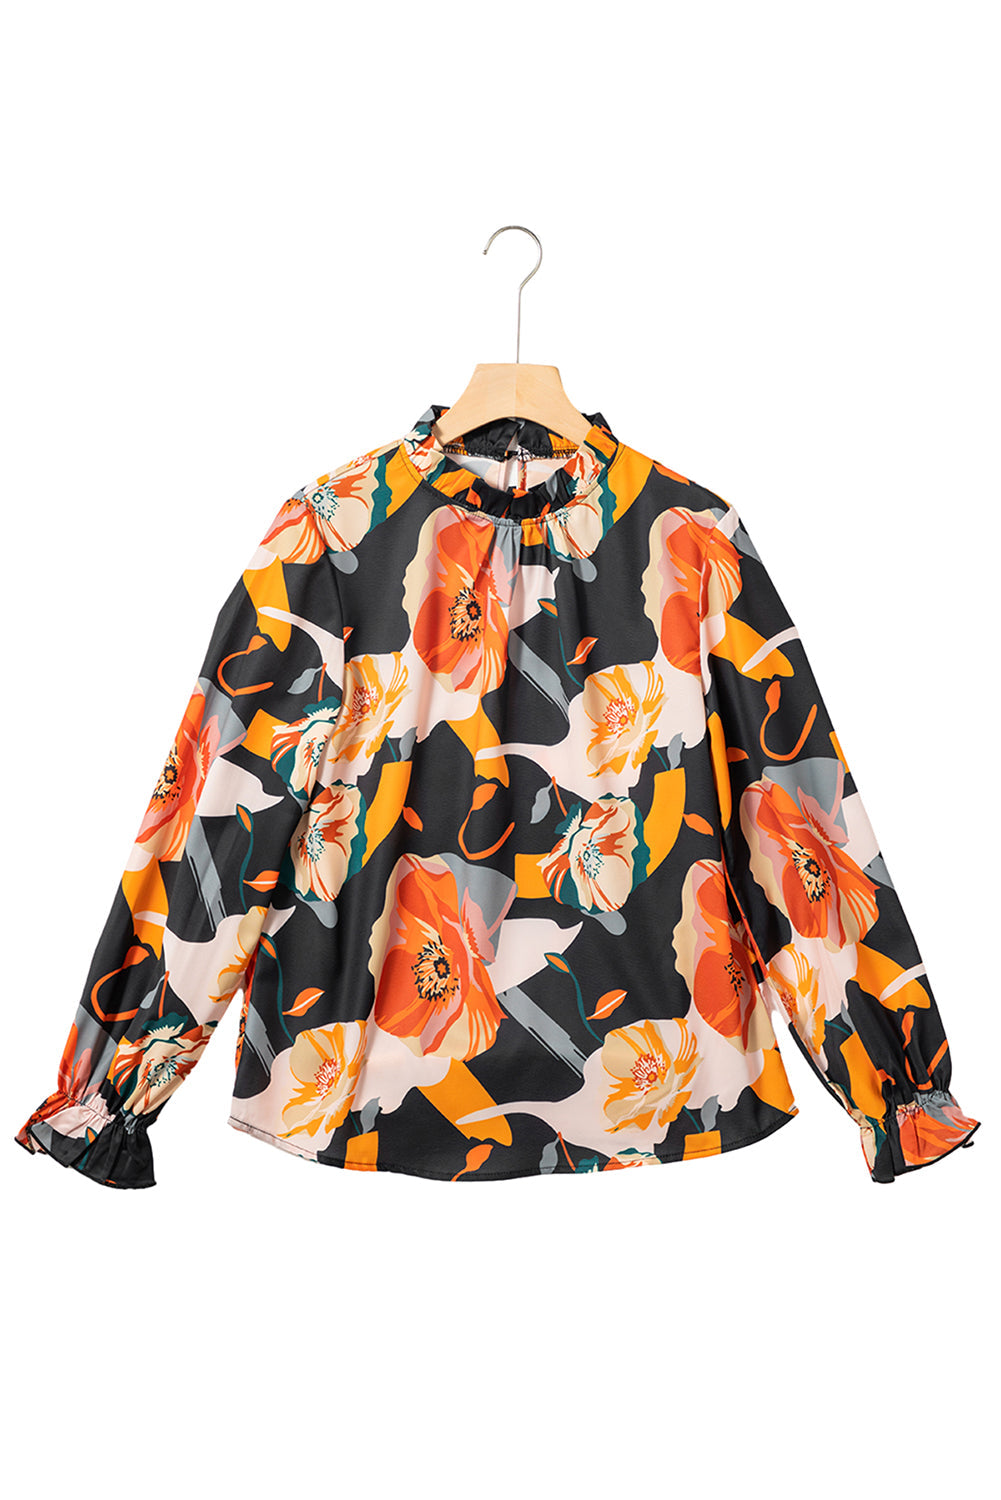 The802Gypsy  Tops TRAVELING GYPSY- Poppy Floral Blouse